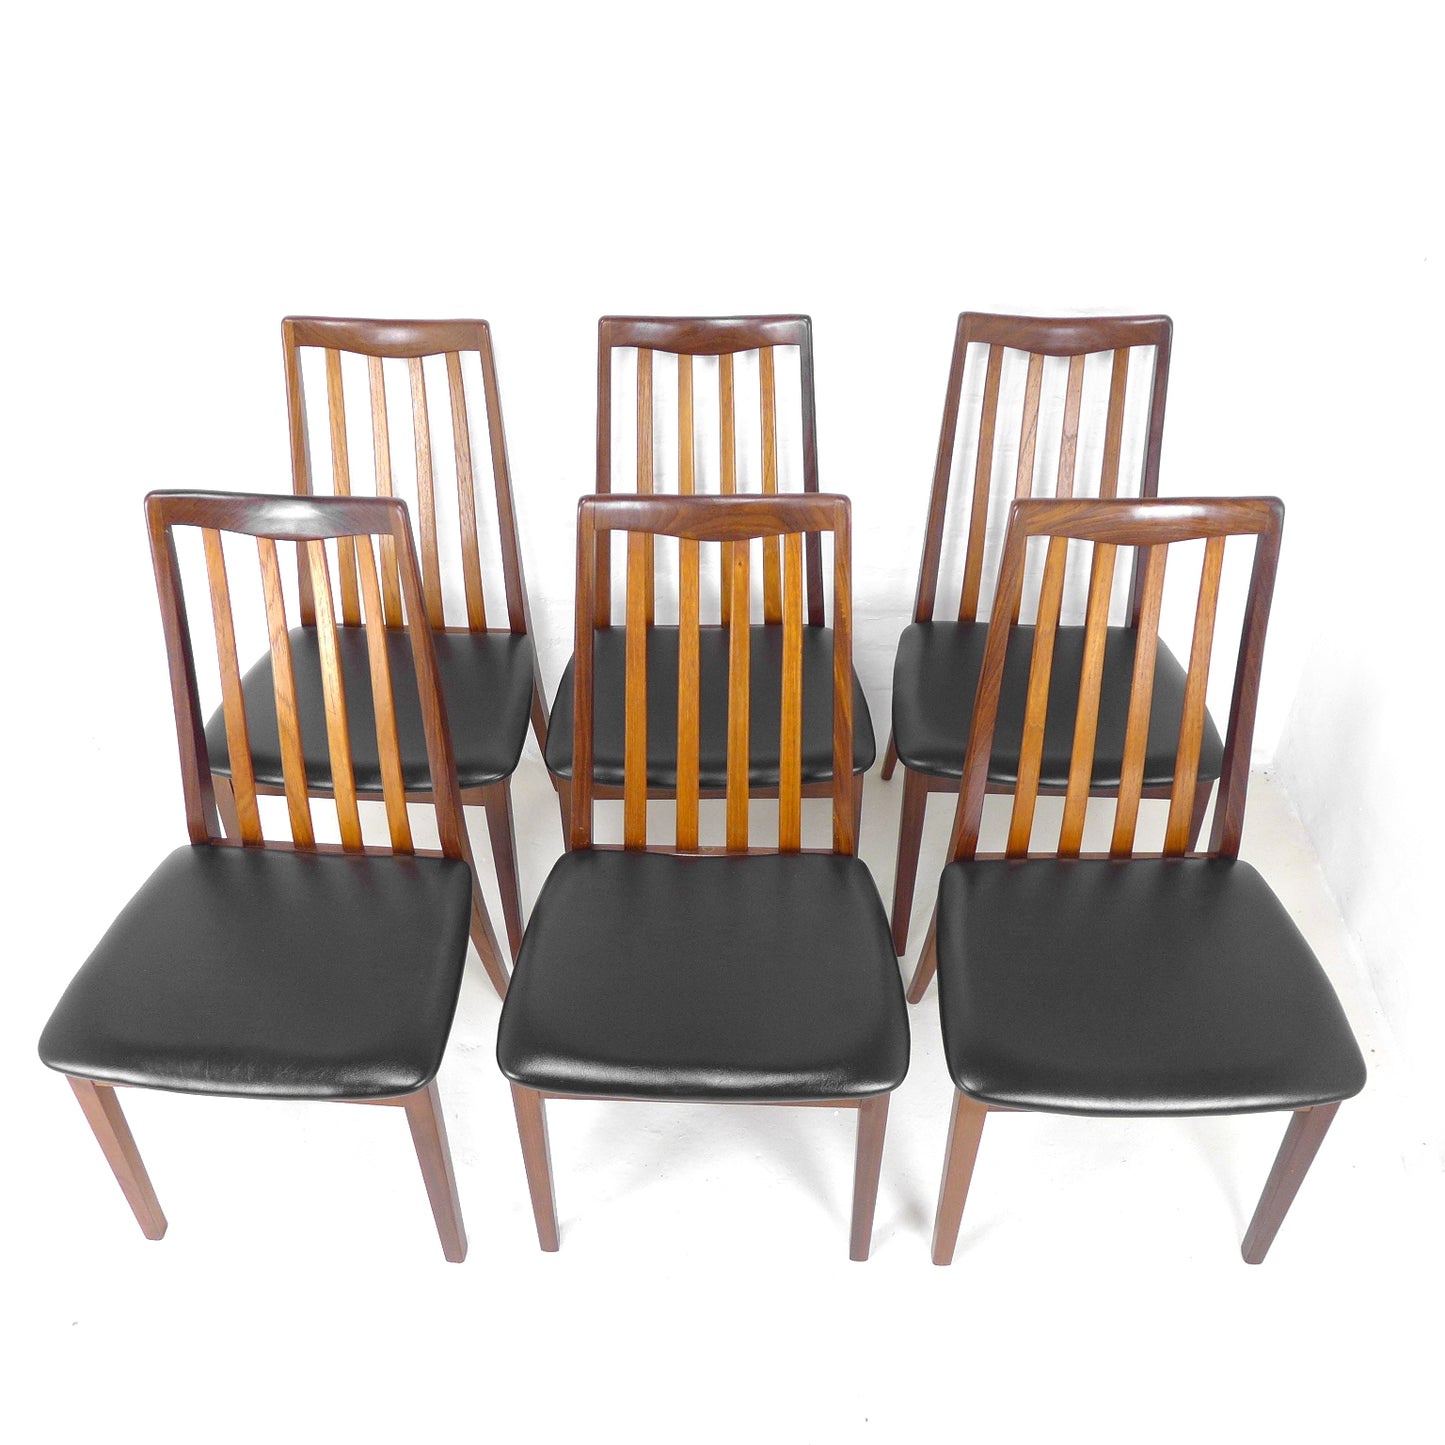 Set of 6 Dining Chairs by G PLAN in Teak *NEW UPHOLSTERY* Mid Century Danish Style